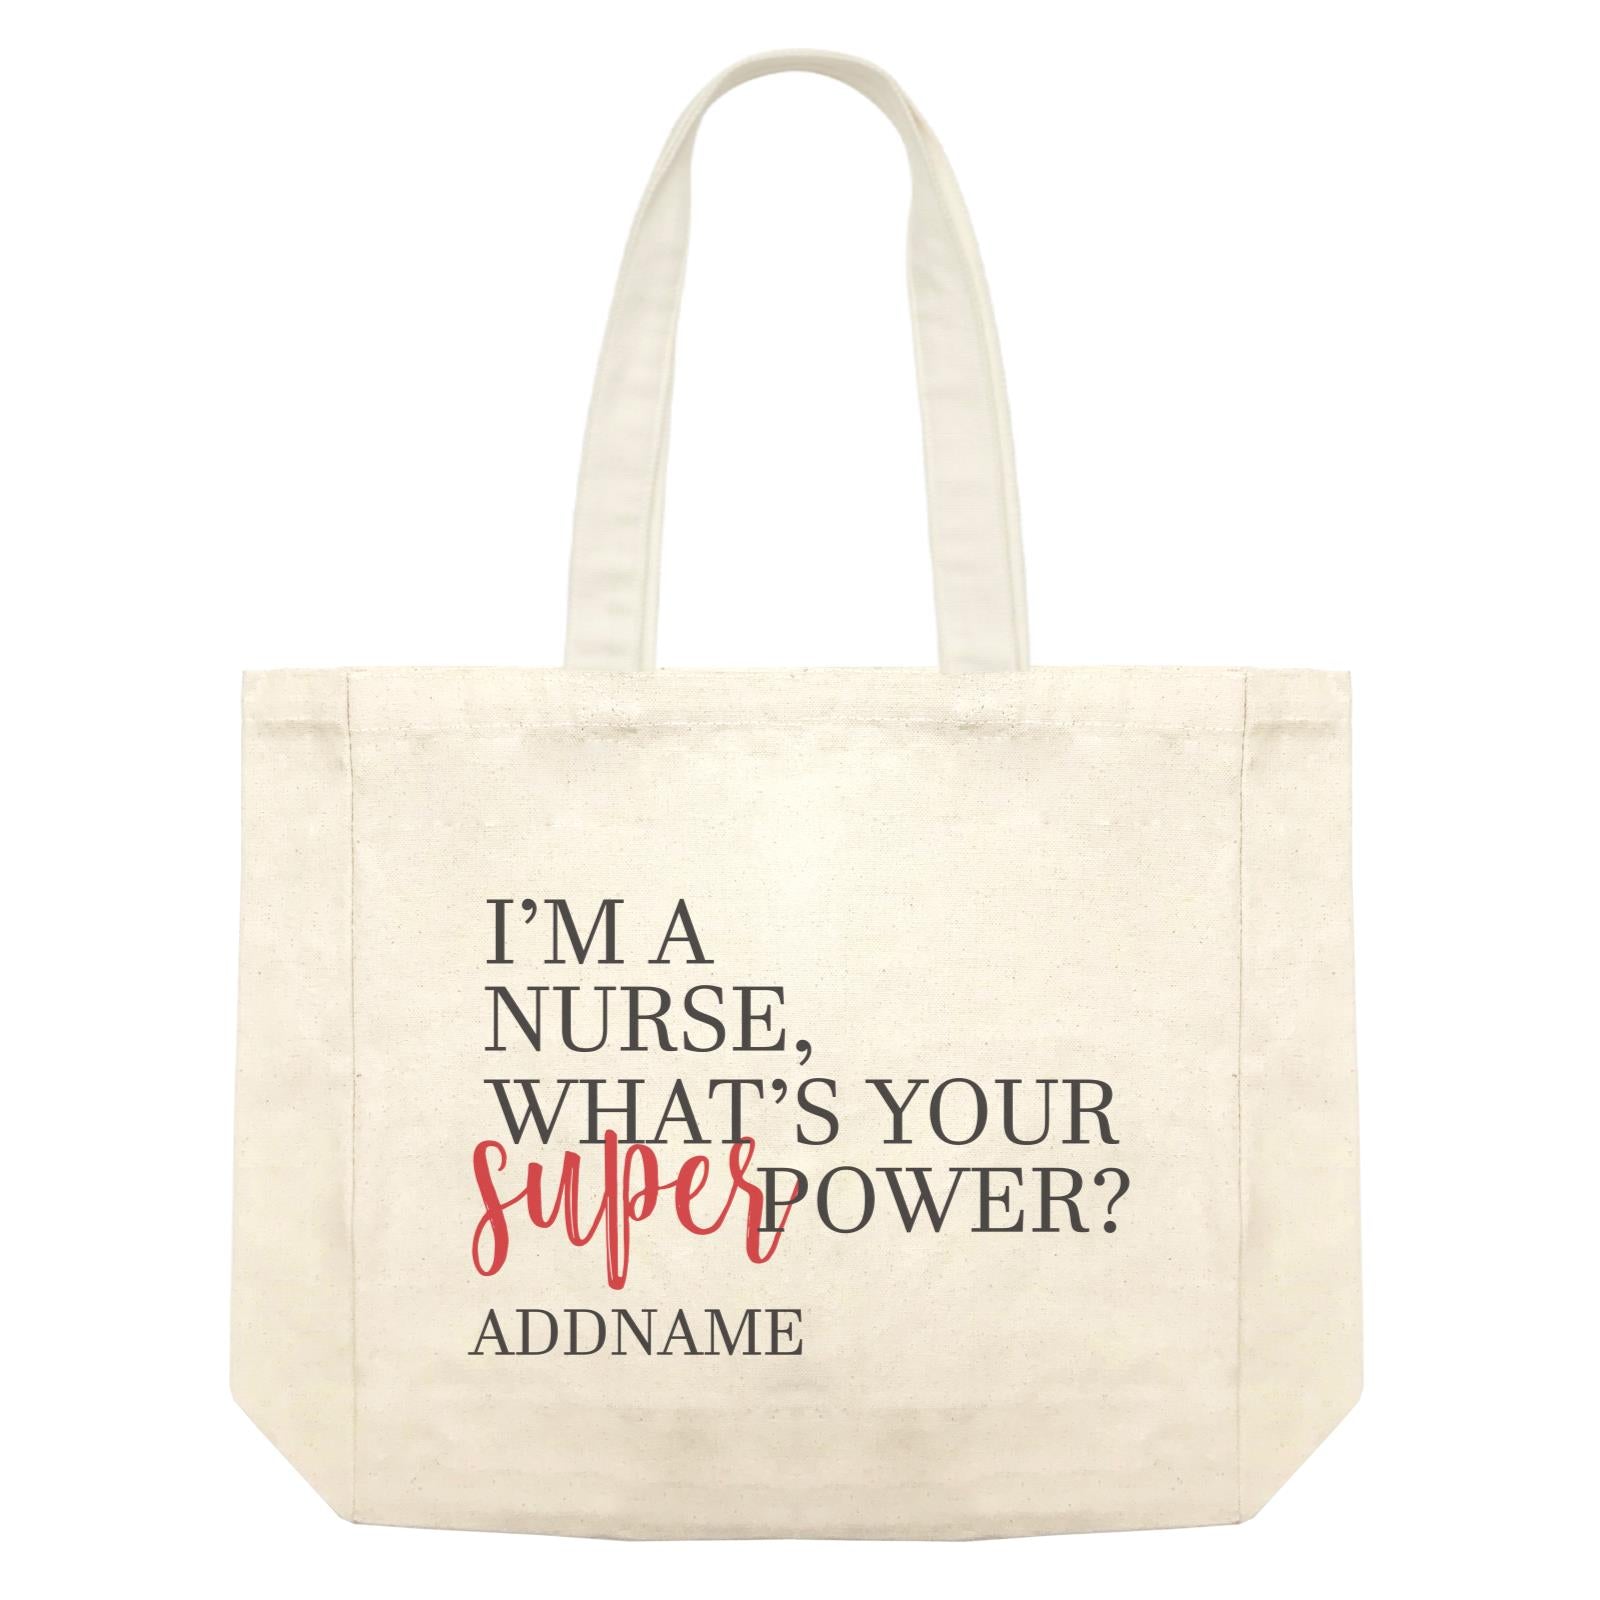 I'm A Nurse, What's Your Superpower Shopping Bag